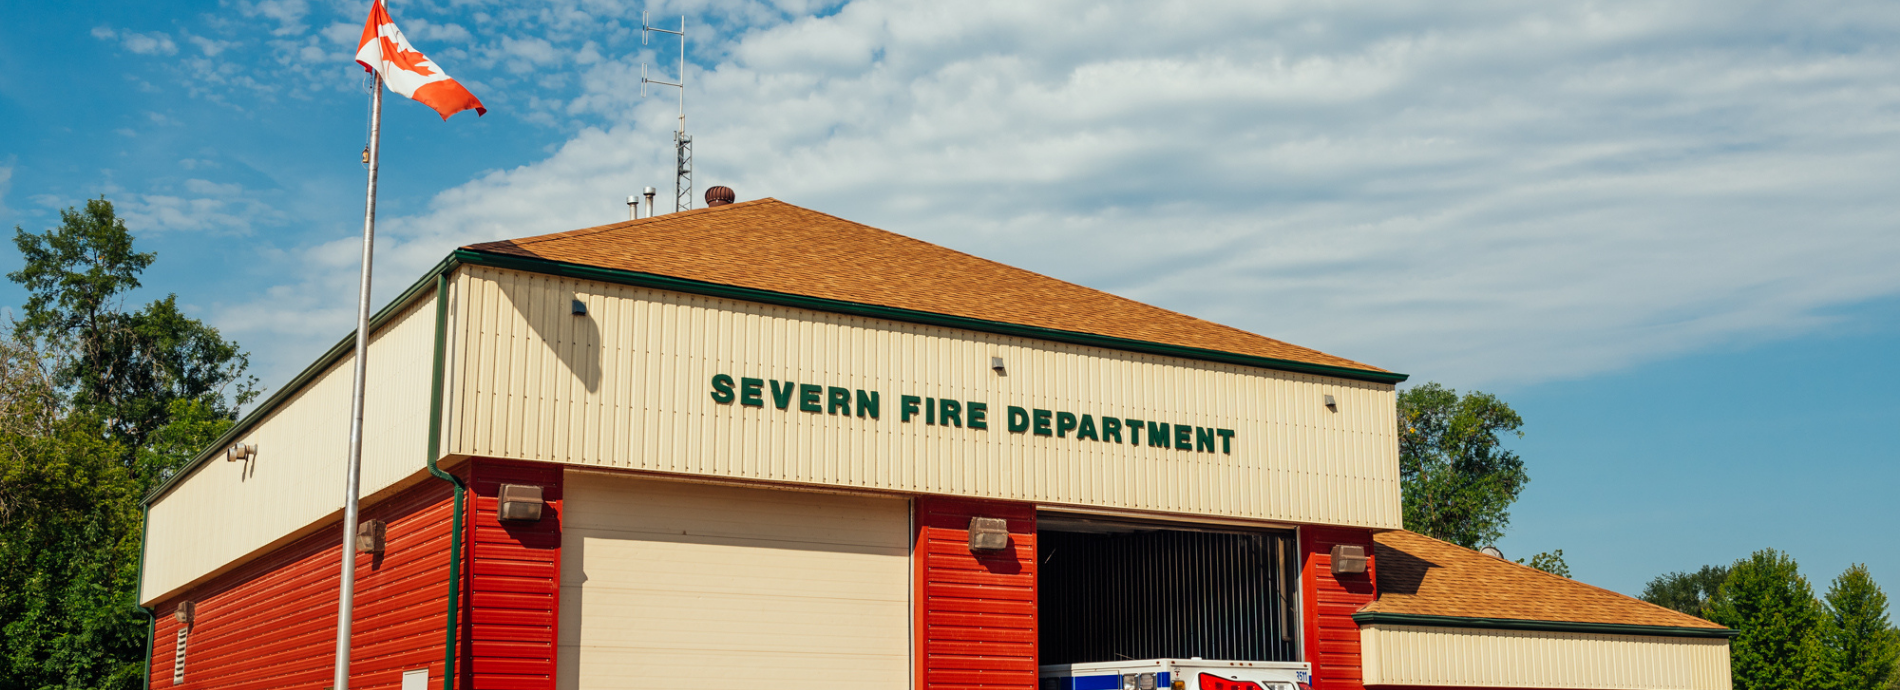 Township of Severn Fire Department